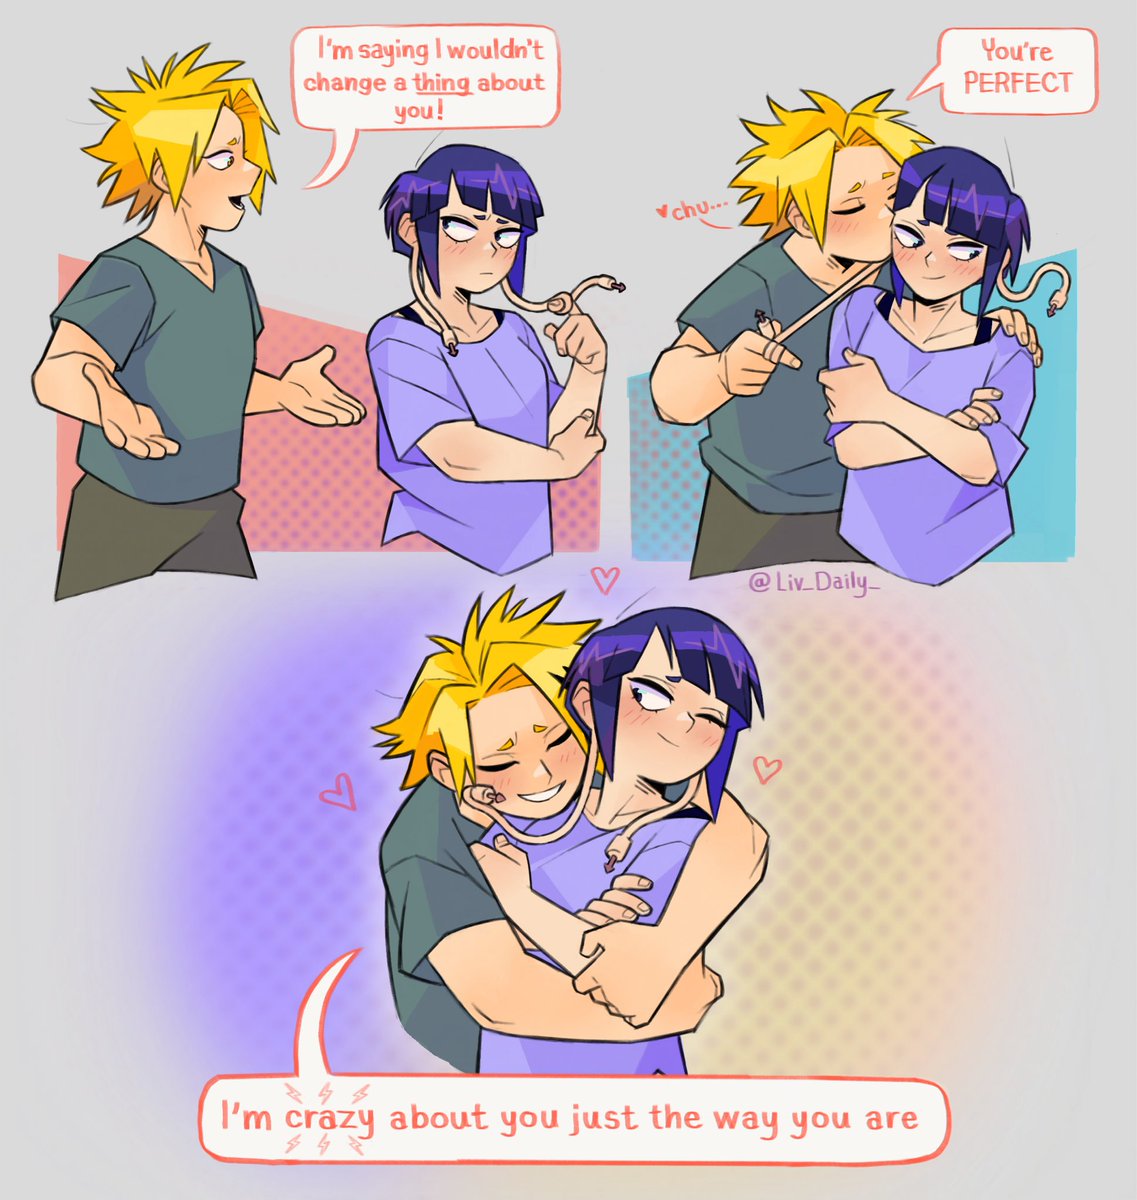 Some people were speculating how the fallout over the silly t-shirt Kaminari got Jirou would go down… Spoiler alert: involves lots of healthy communication and loving affirmations 🤭😘